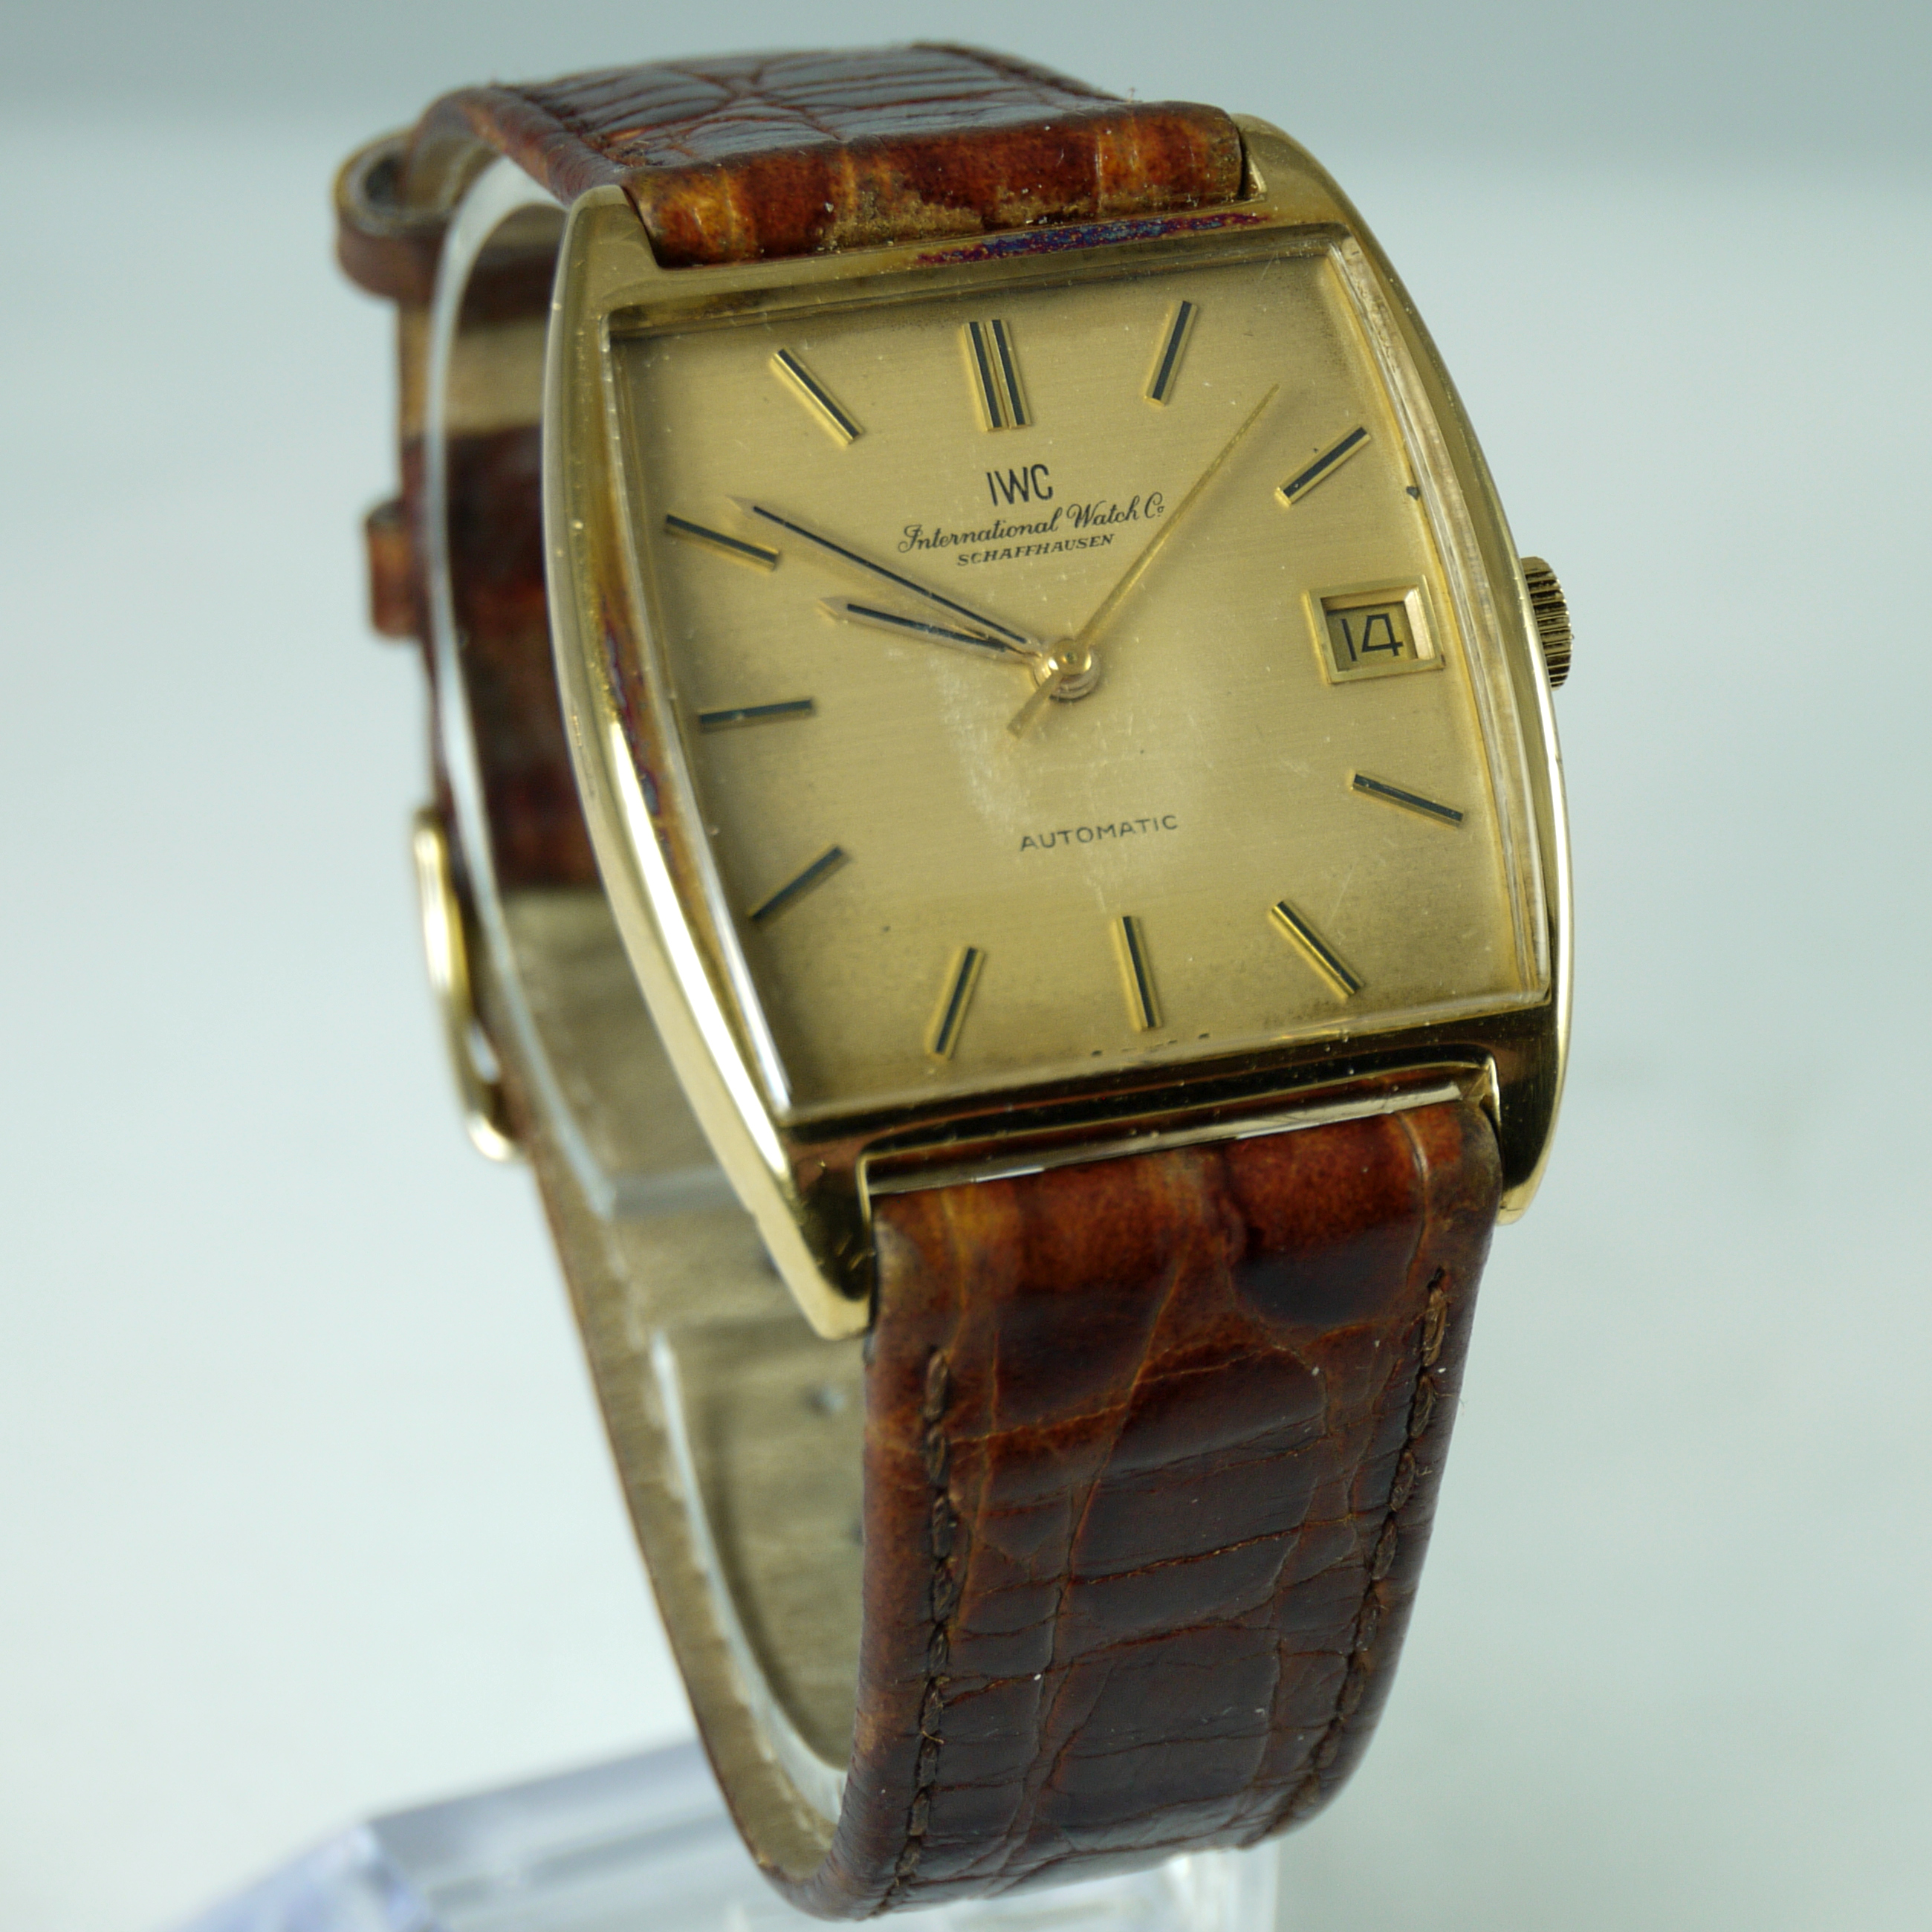 International Watch Co Automatic wristwatch in 14 karat yellow gold with brown leather strap